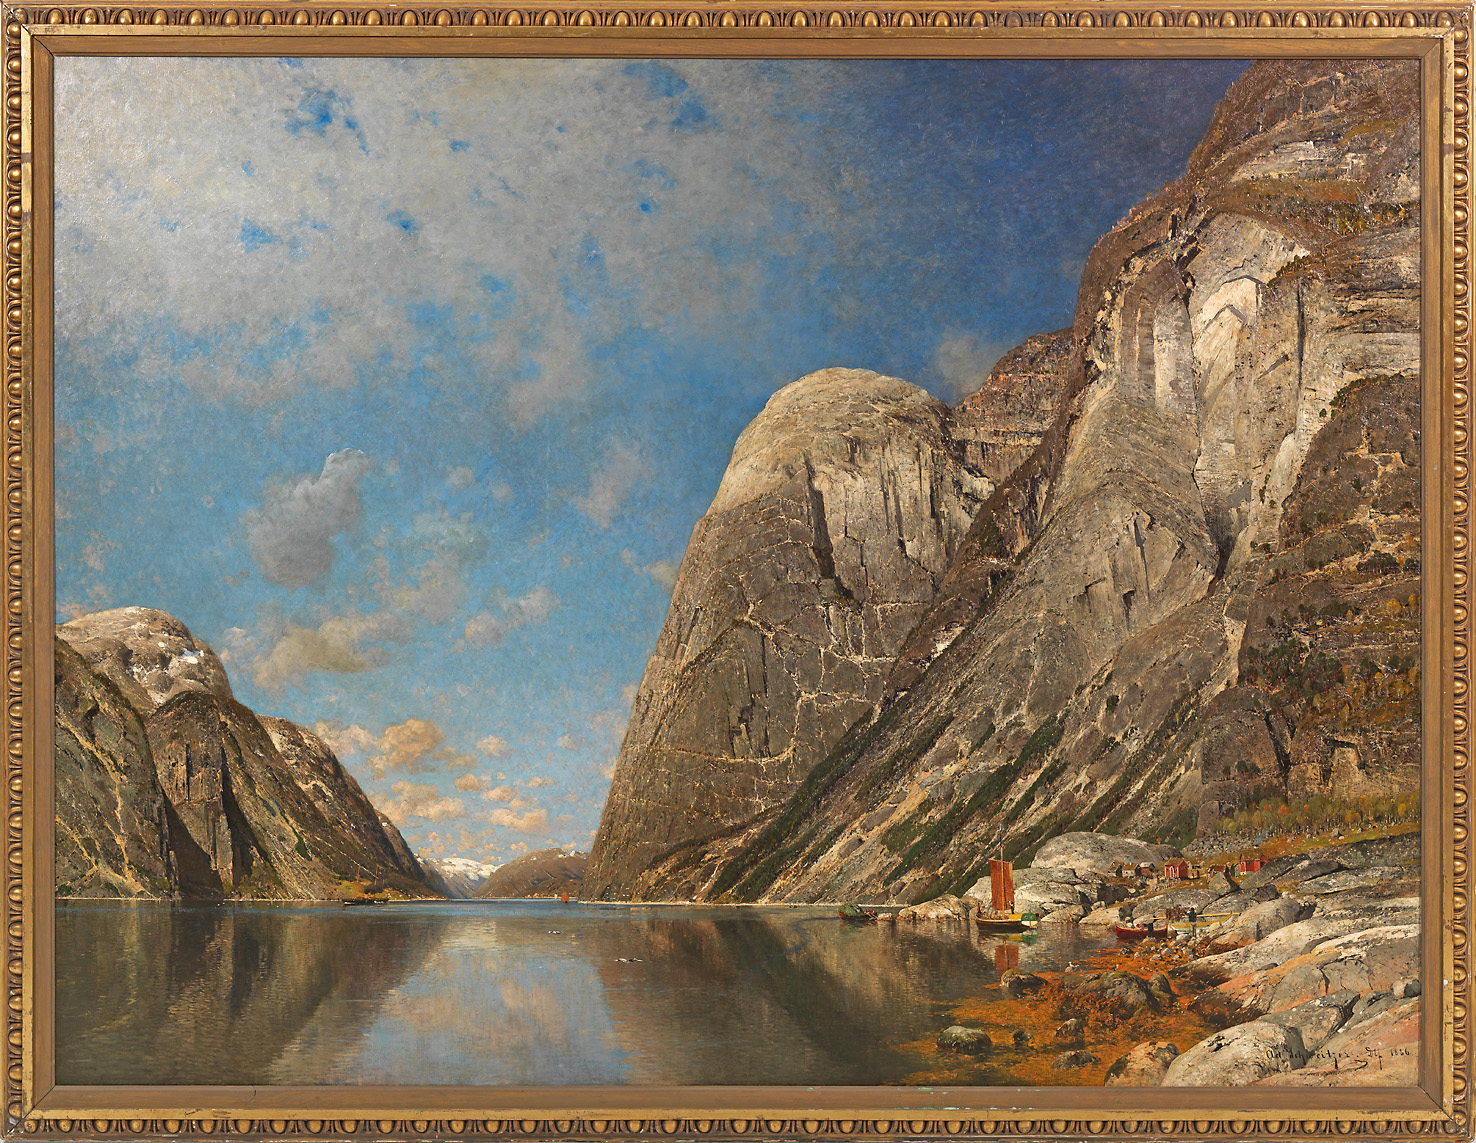 Painting of the Naeroyfjord by A.G. Sweitzer